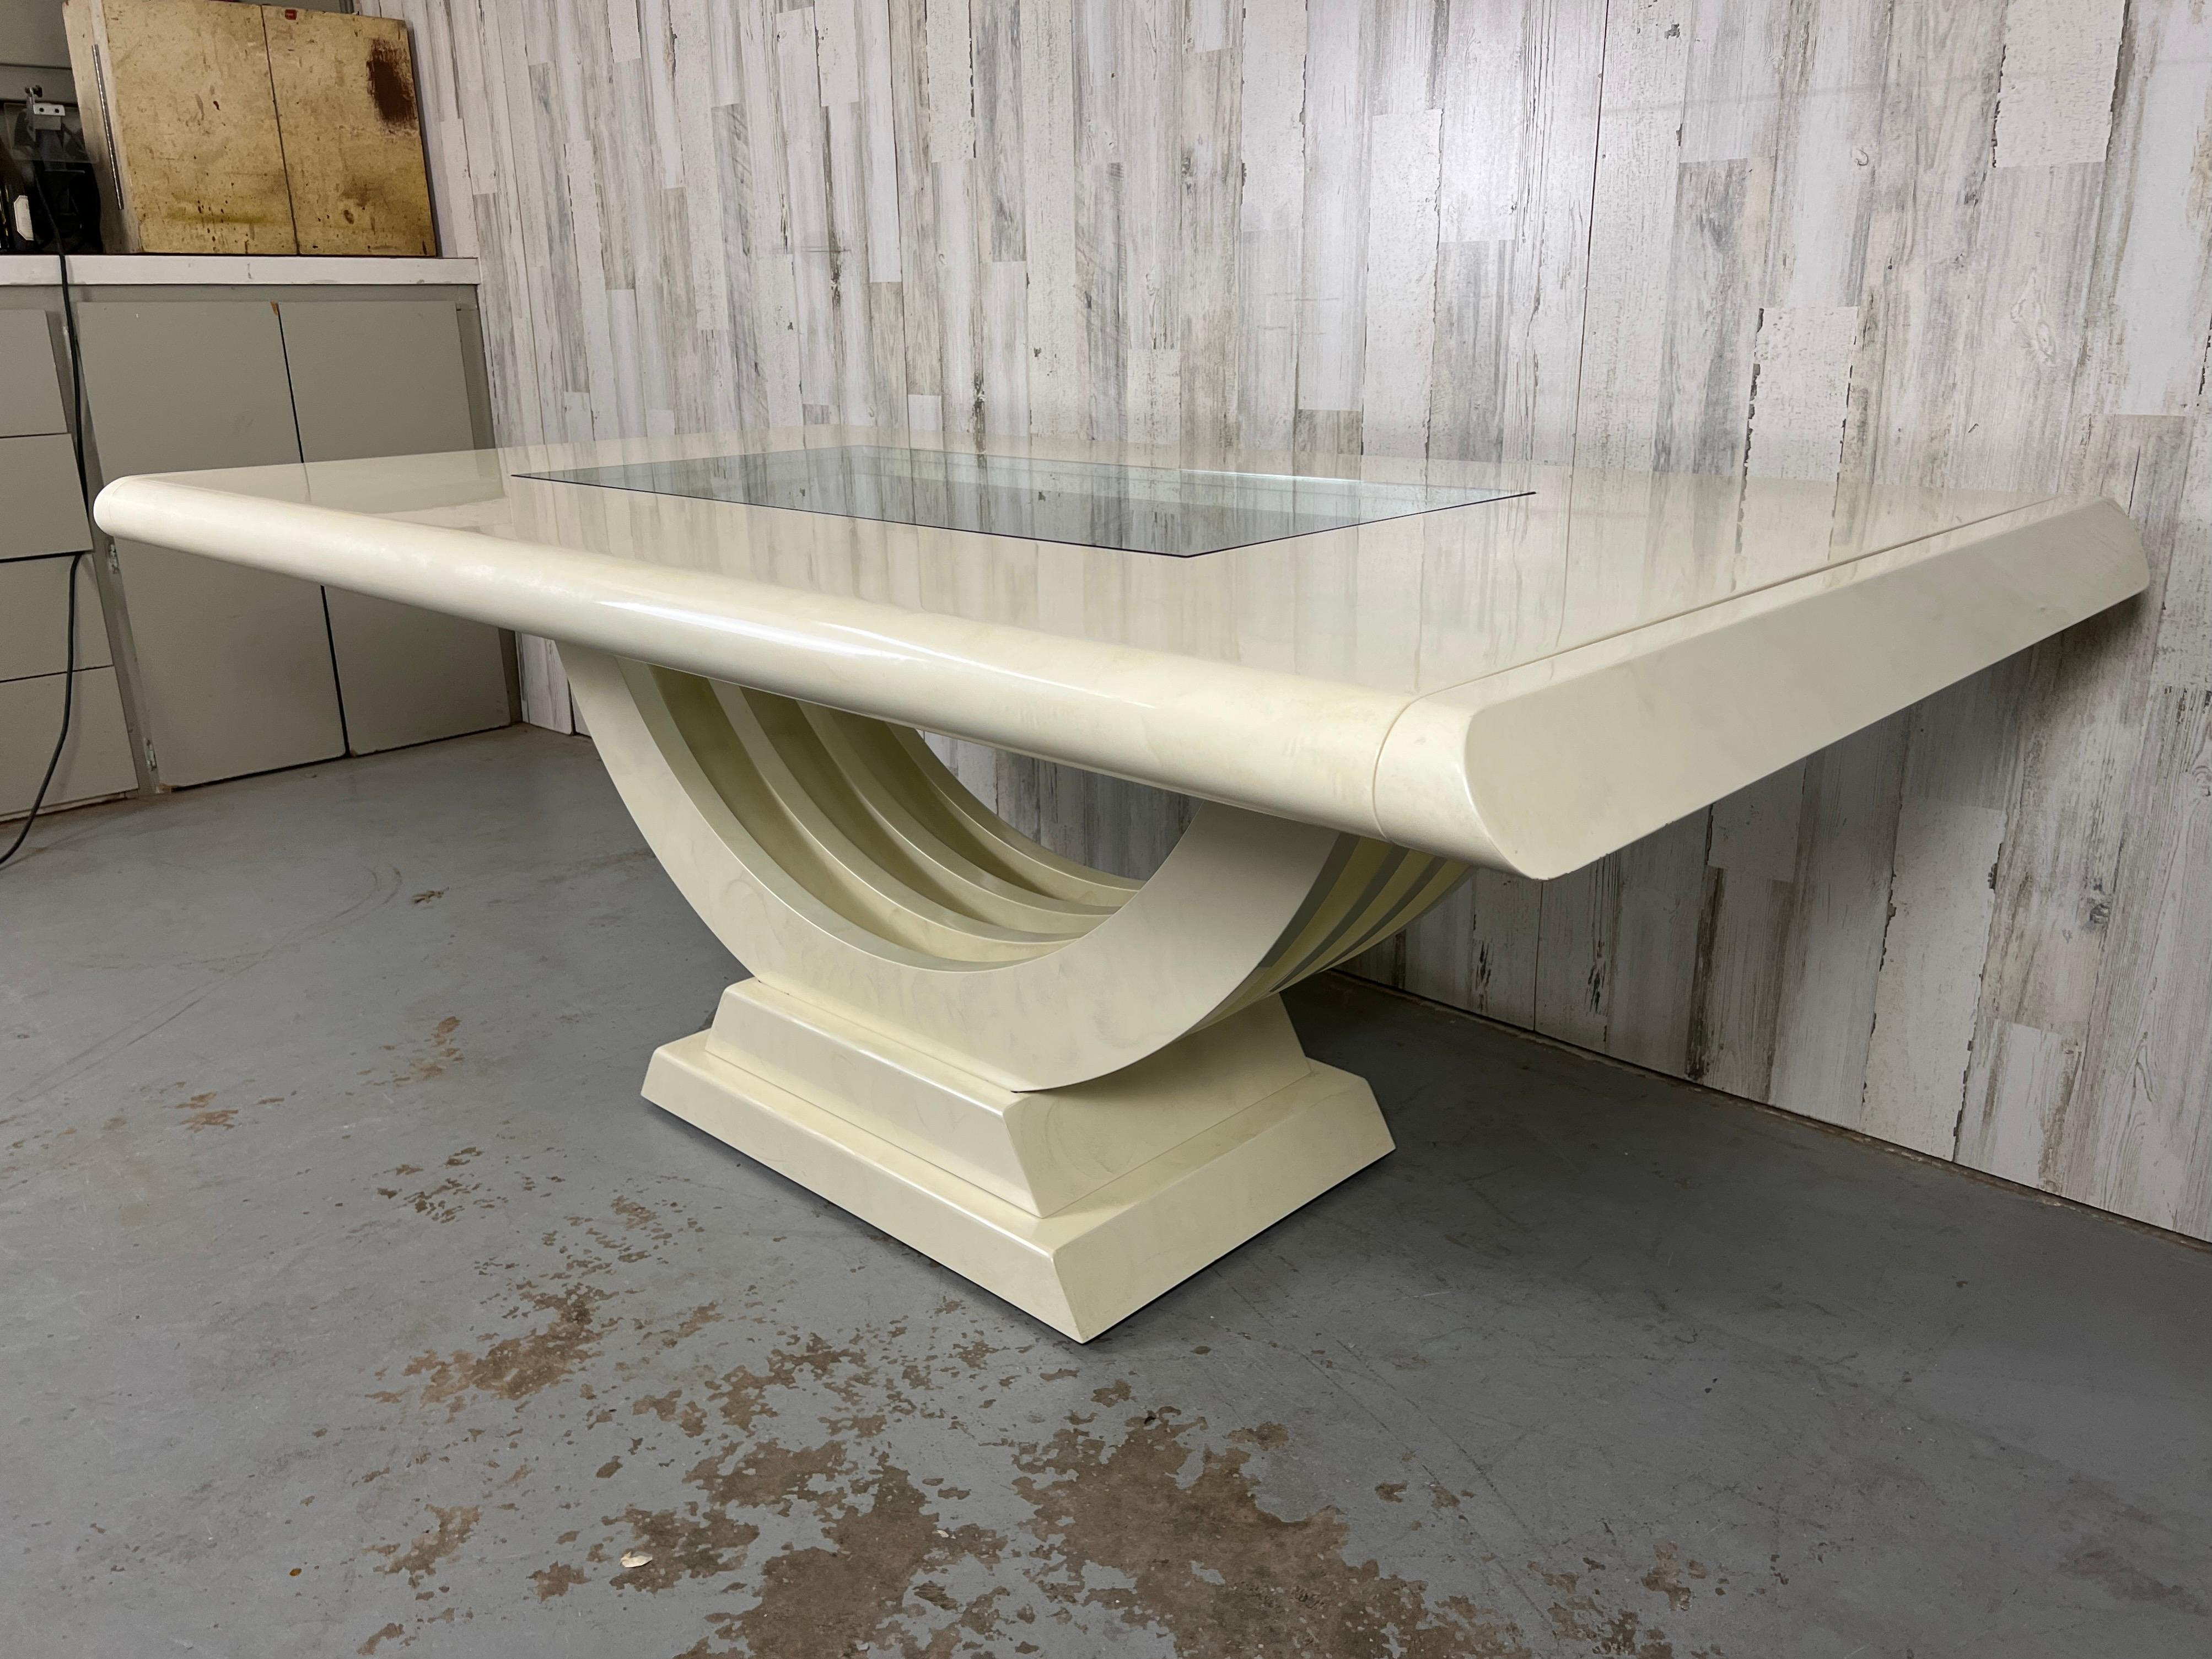 European Hand Painted Art Deco Dining Table by Kelly L. Gerges In Good Condition For Sale In Denton, TX